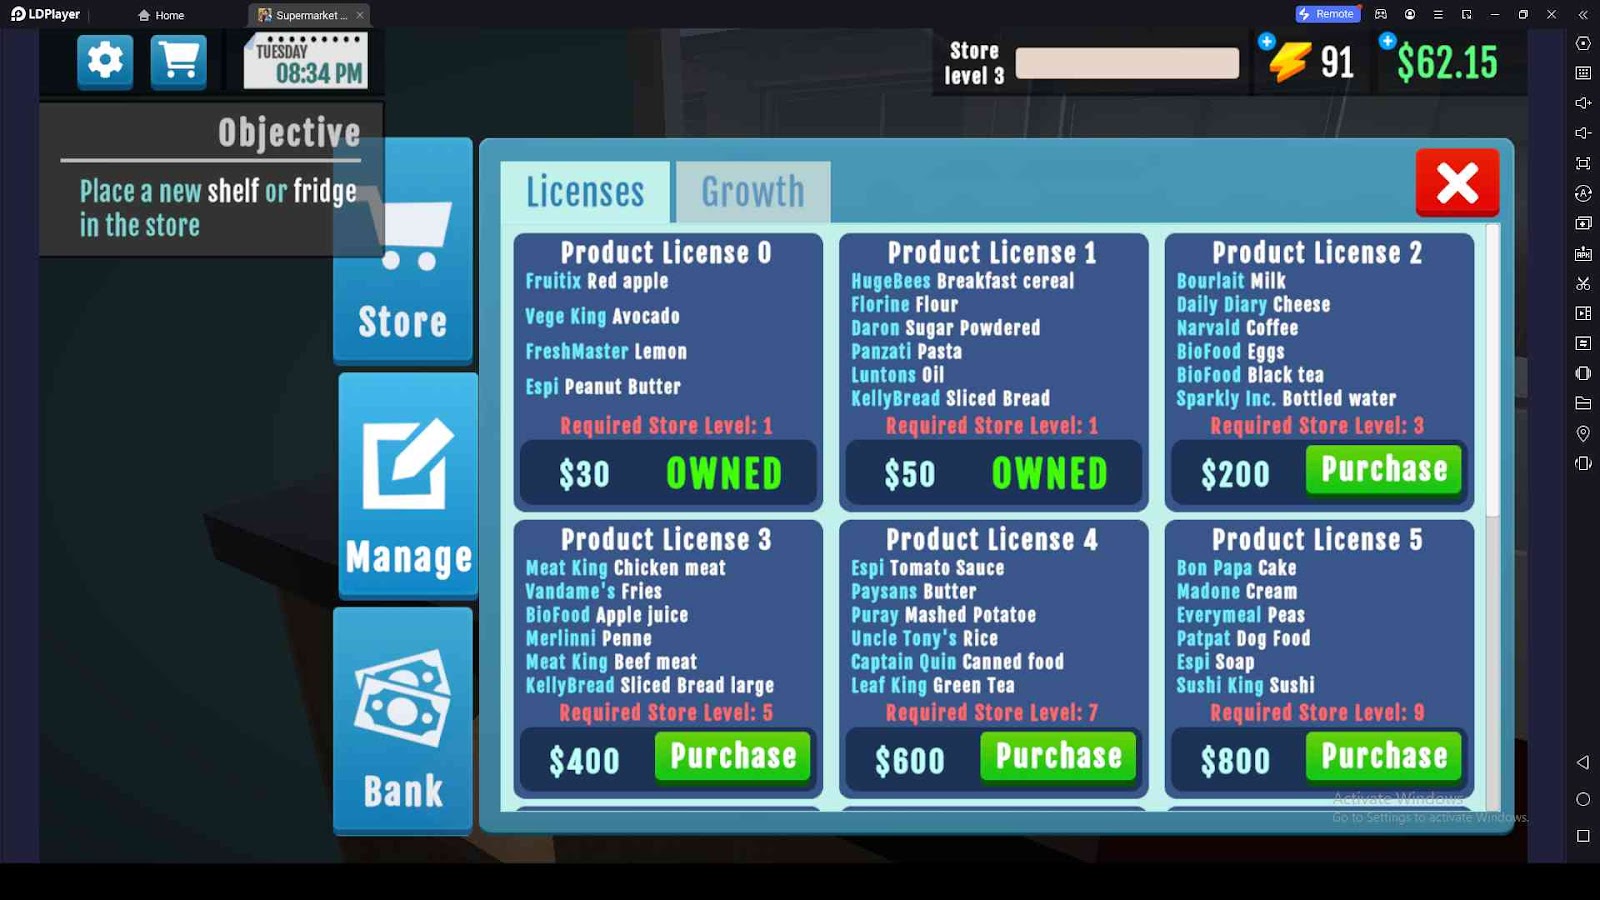 Purchase New Product Licenses in Supermarket Manager Simulator